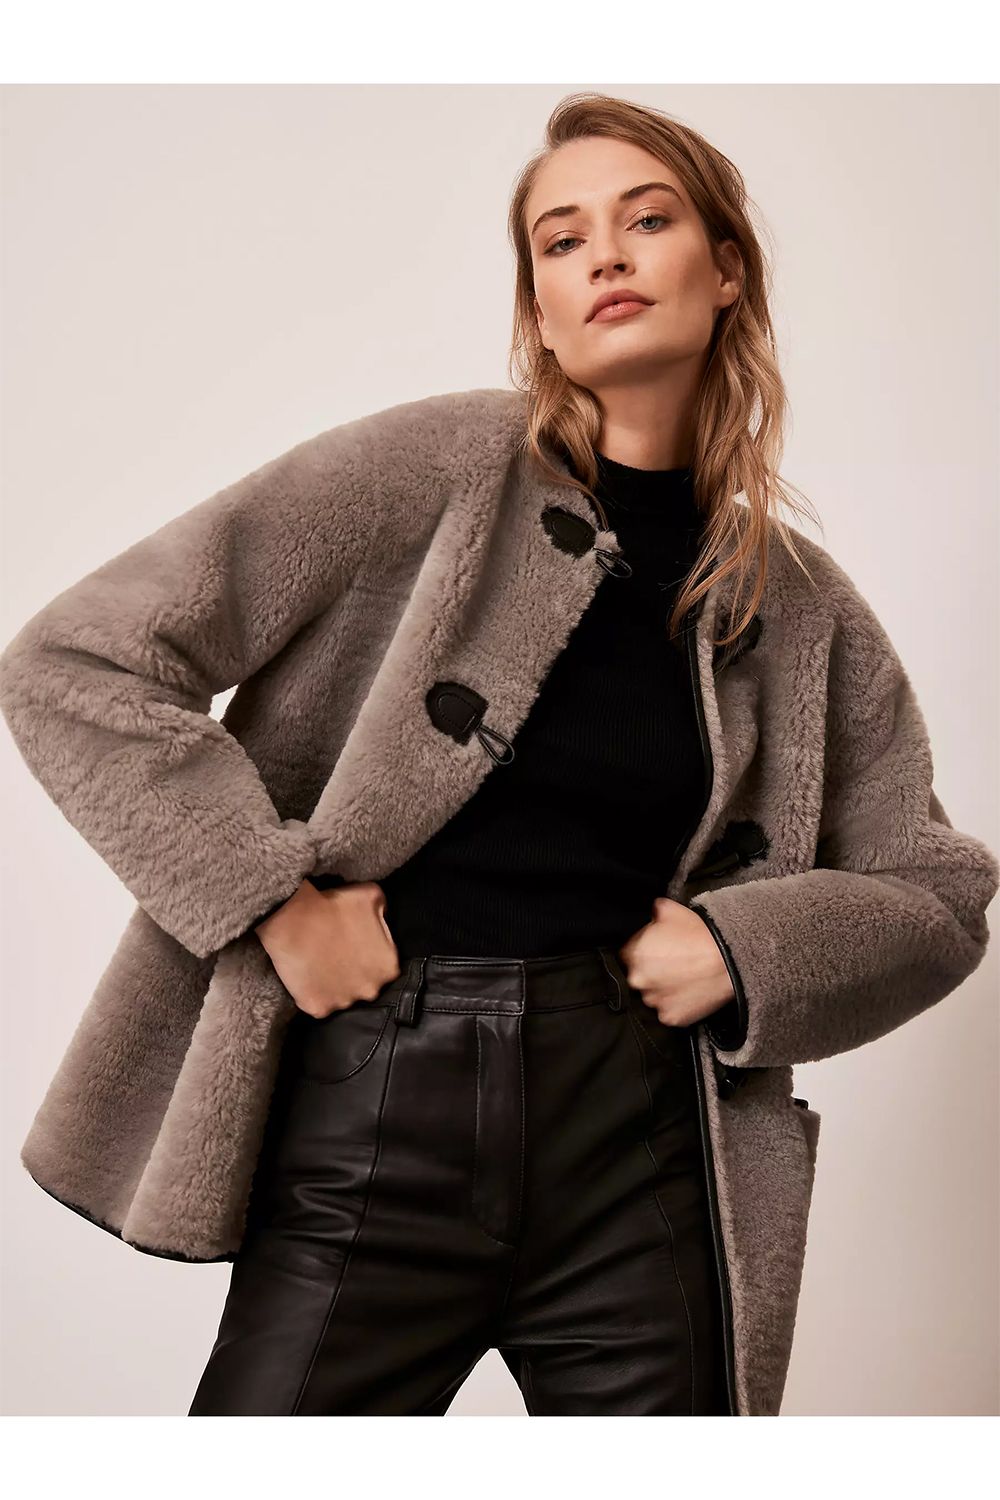 Shearling Coats and Jackets: Shop The Best High-Street and Designer ...